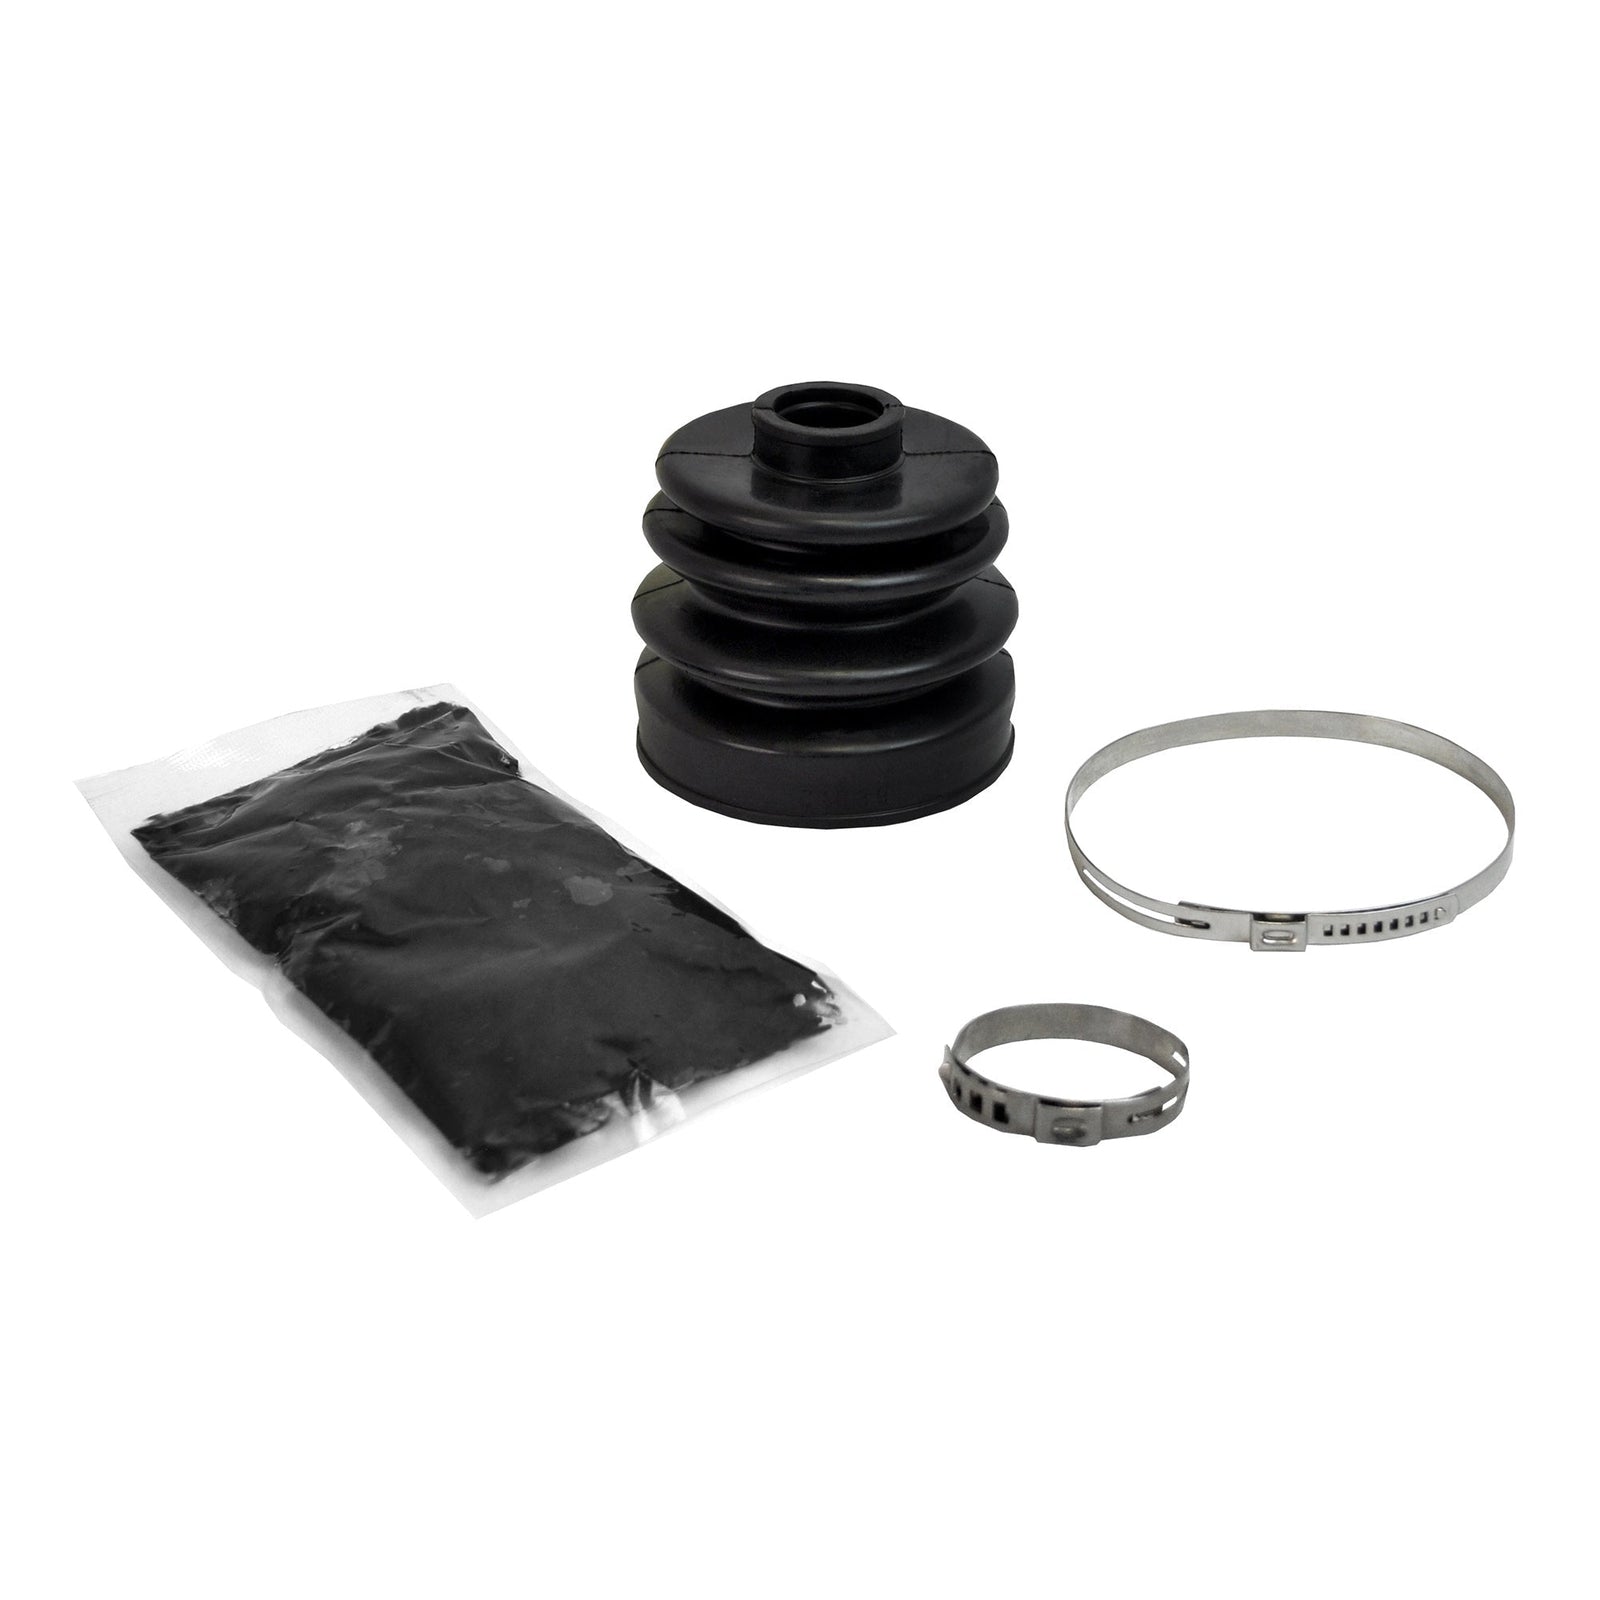 Arctic Cat HDX 700 Rugged OE Replacement Boot Kit